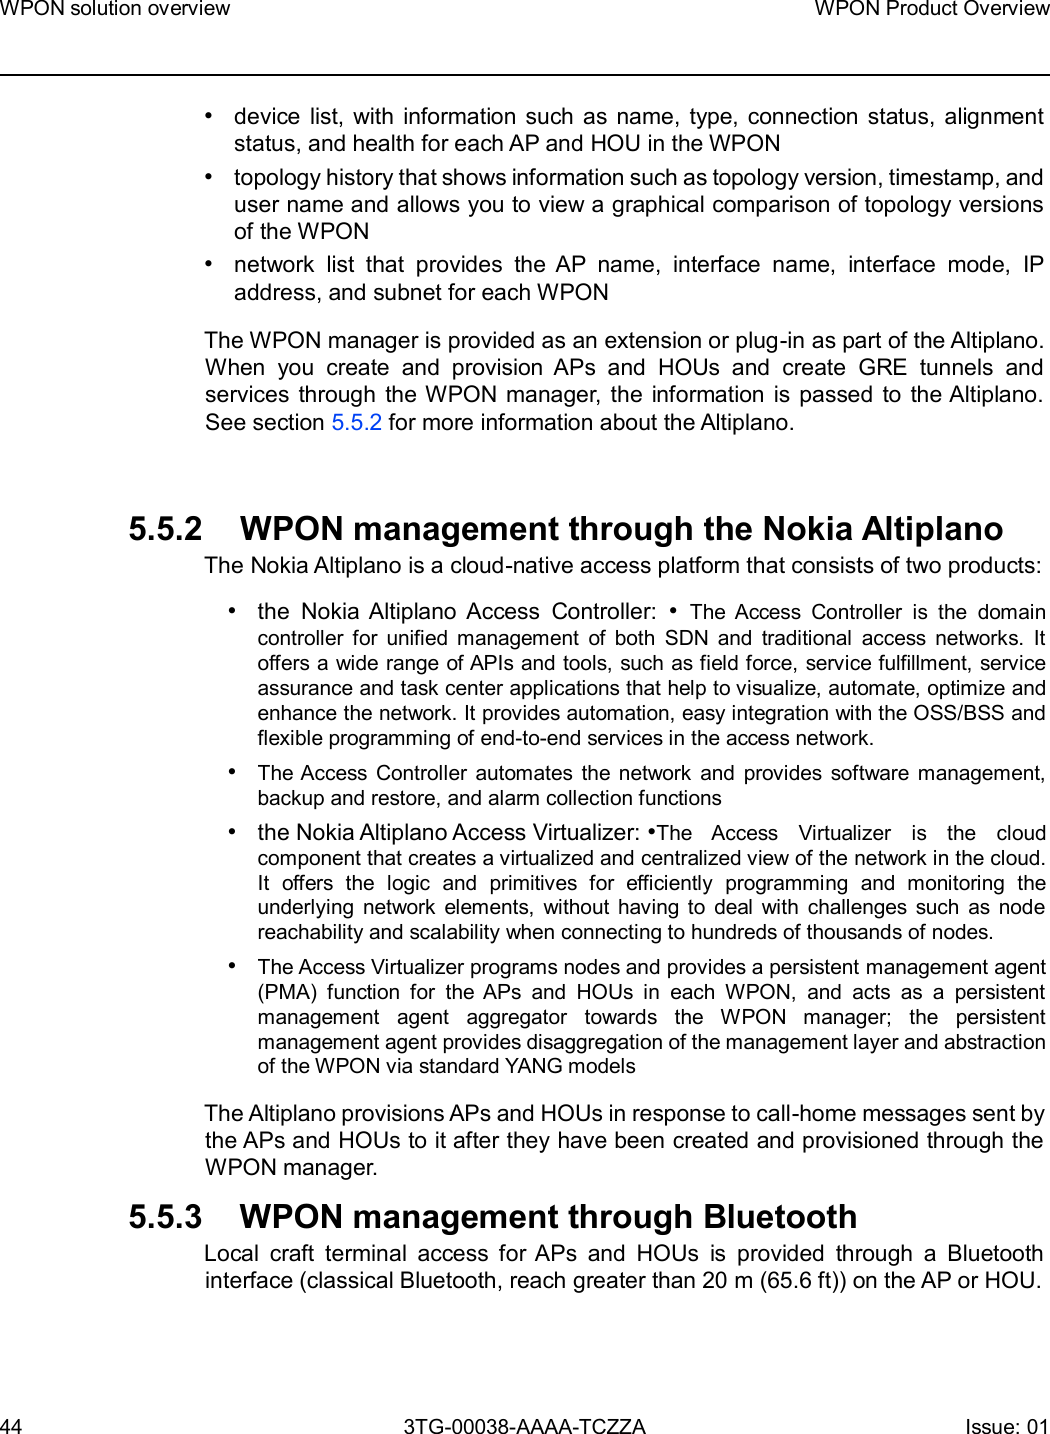 Page 44 of Nokia Bell 7577WPONAPAC WPON User Manual WPON Product Overview